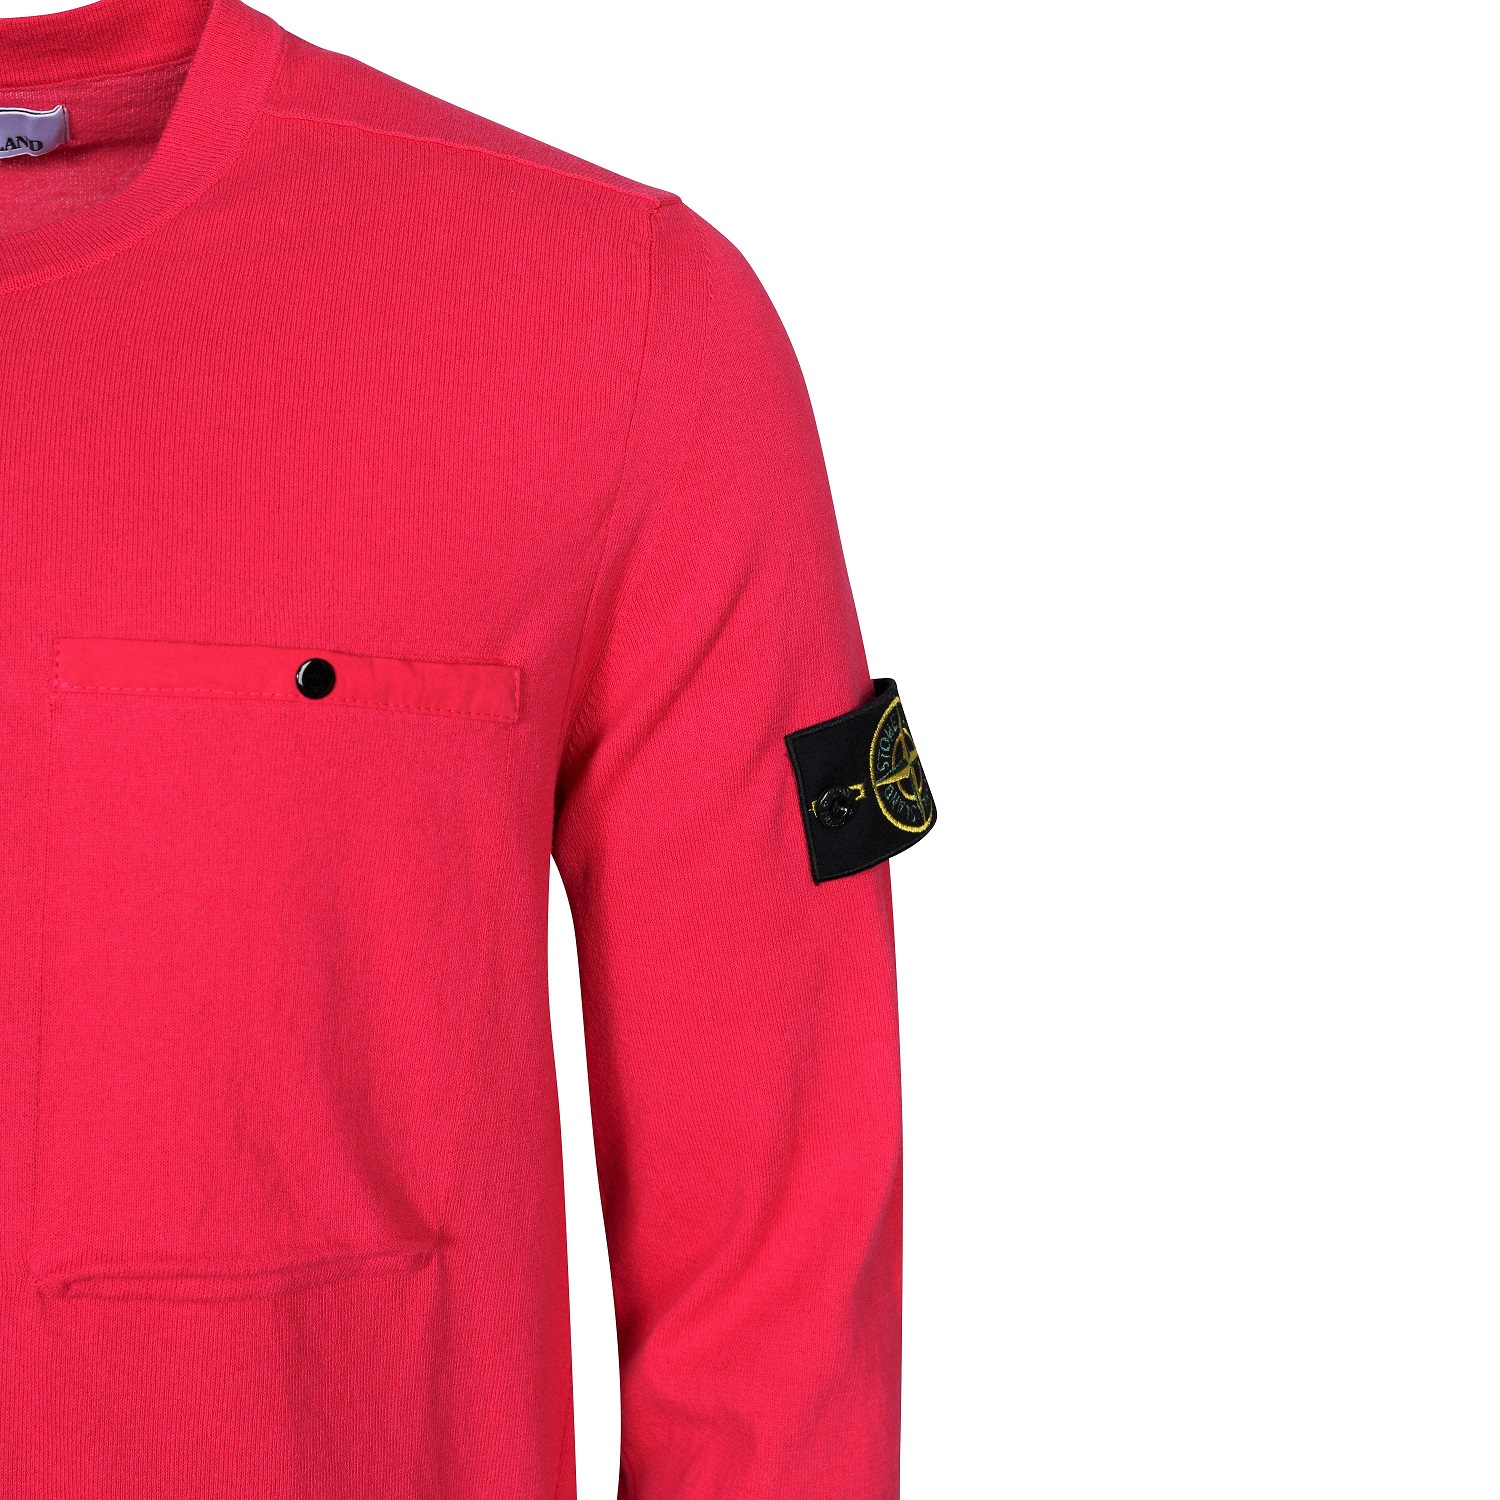 Stone Island Chest Pocket Knit Sweater in Pink L